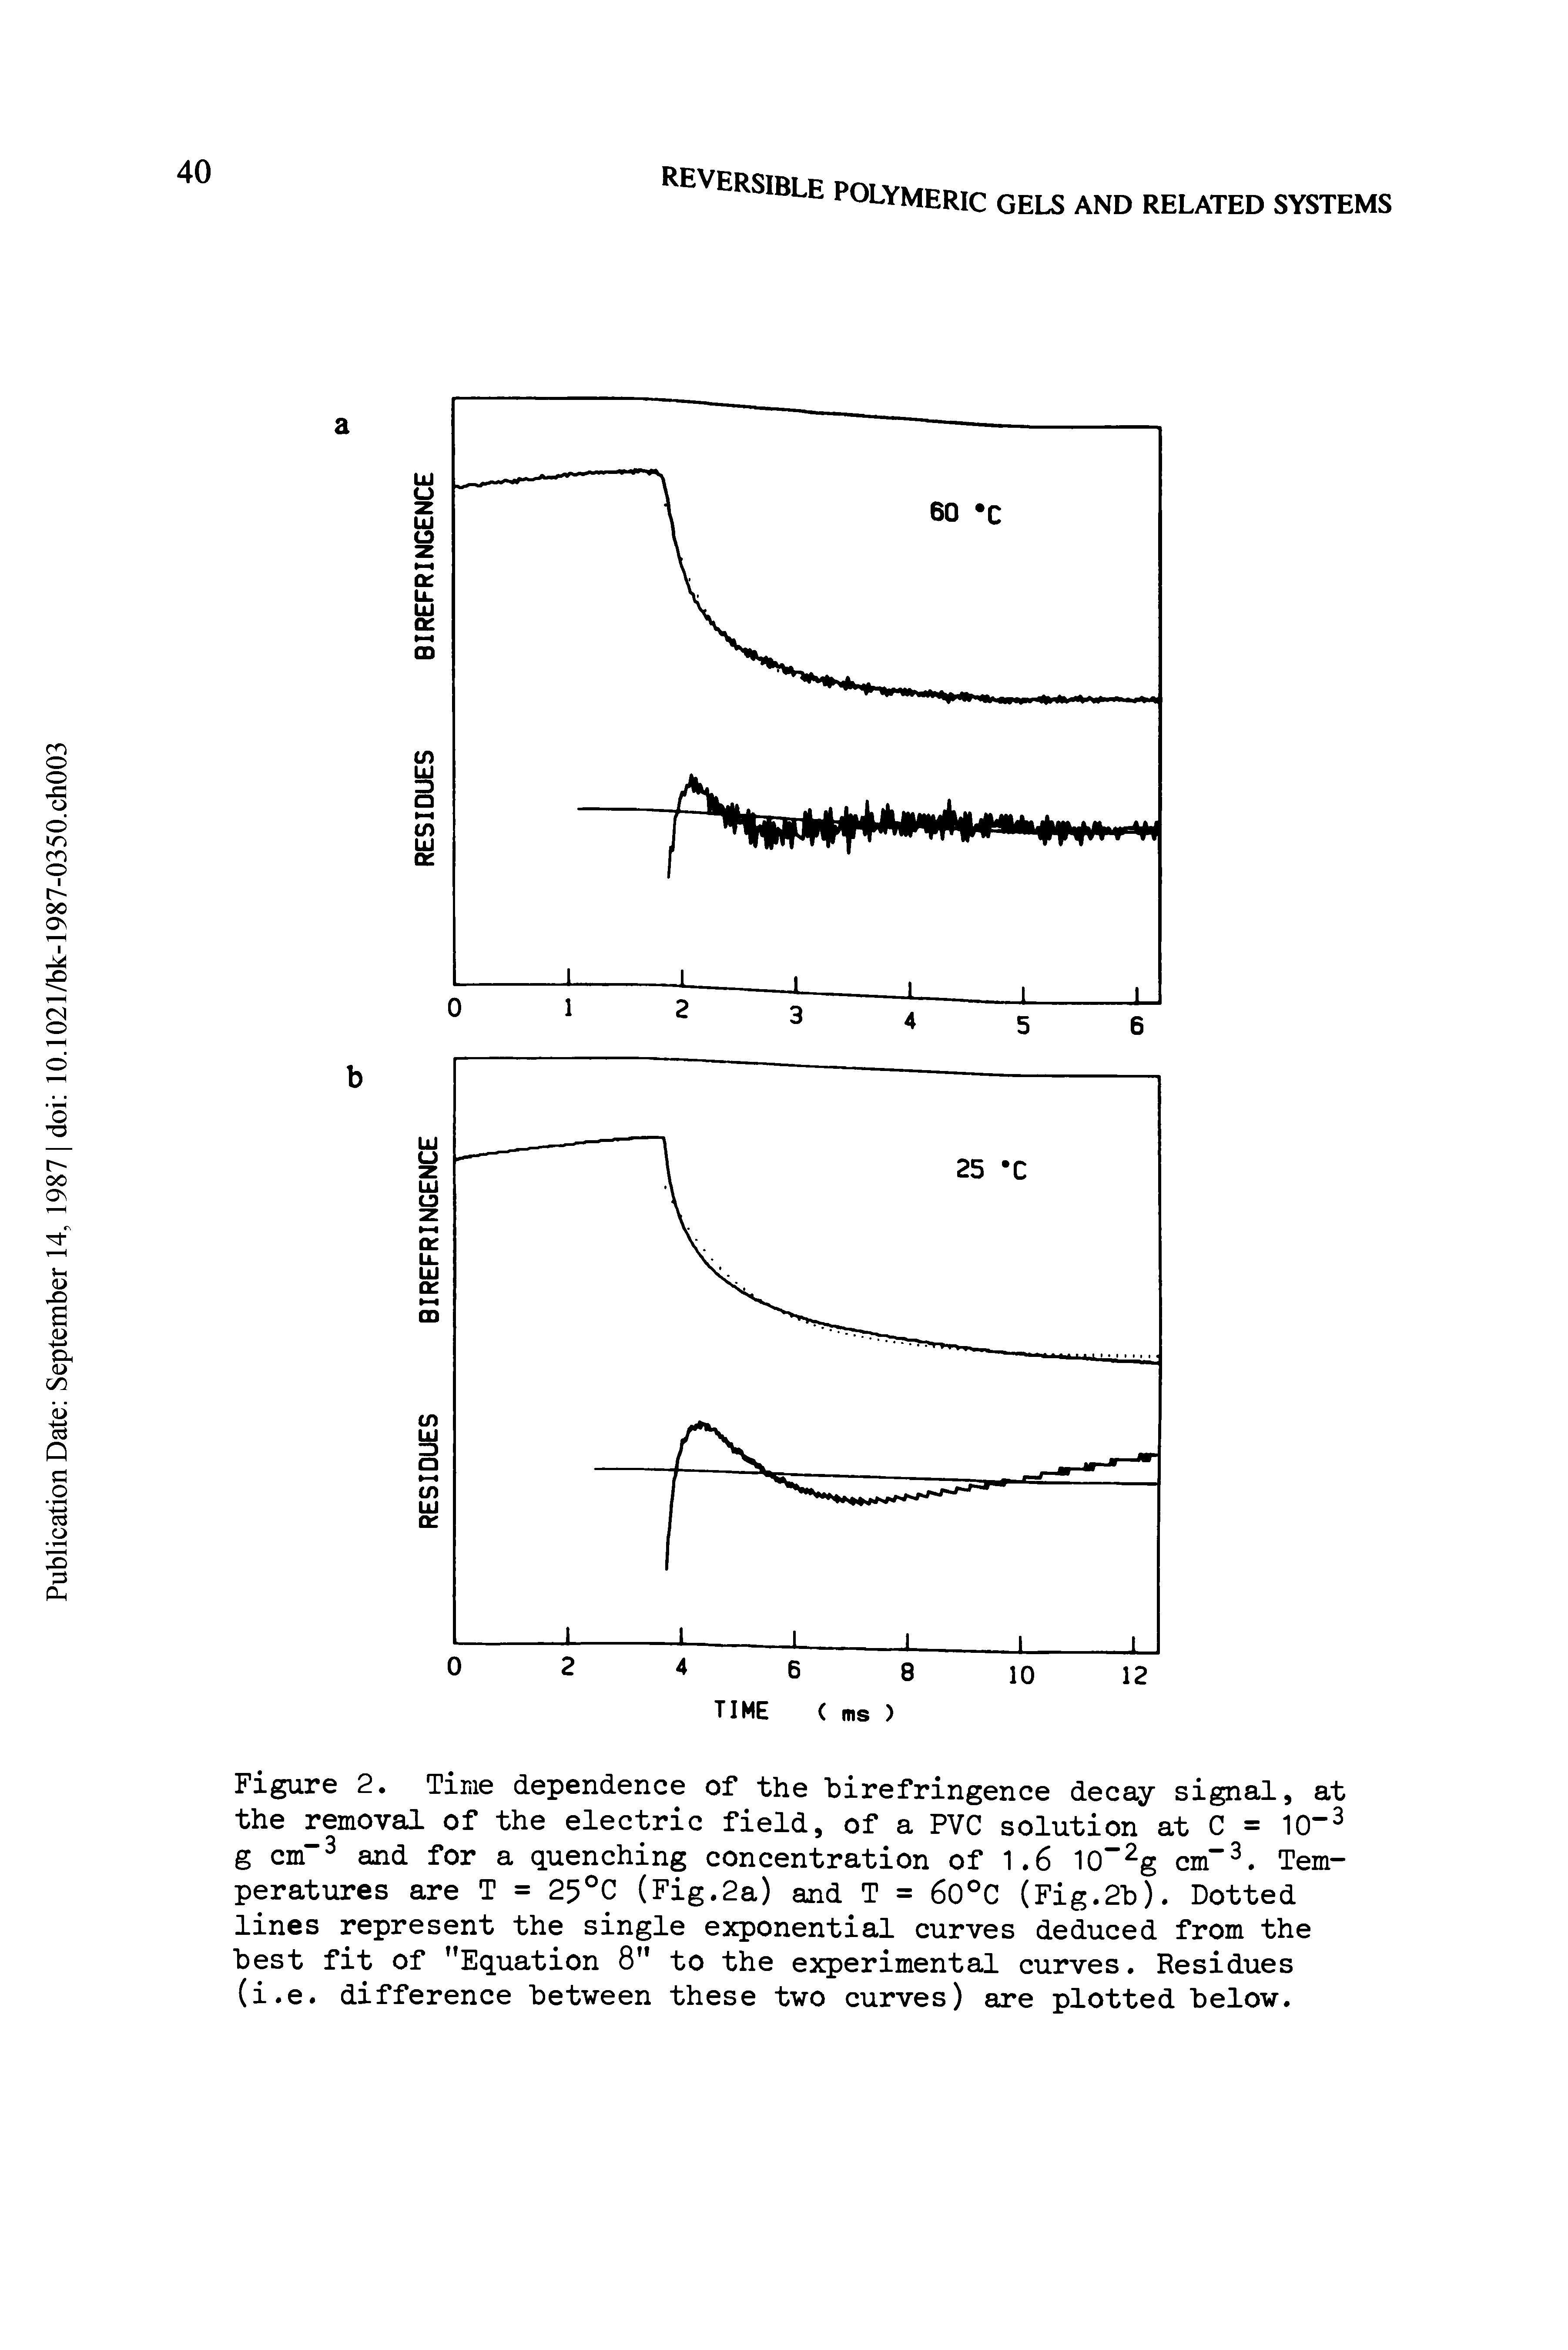 Figure 2. Time dependence of the "birefringence decay signal, at the removal of the electric field, of a PVC solution at C = 10" g cm and for a quenching concentration of 1.6 10 g cm . Temperatures are T = 25°C (Fig,2a) and T = 60°C (Fig.2b). Dotted lines represent the single exponential curves deduced from the "best fit of Equation 8 to the experimental curves. Residues (i.e. difference between these two curves) are plotted below.